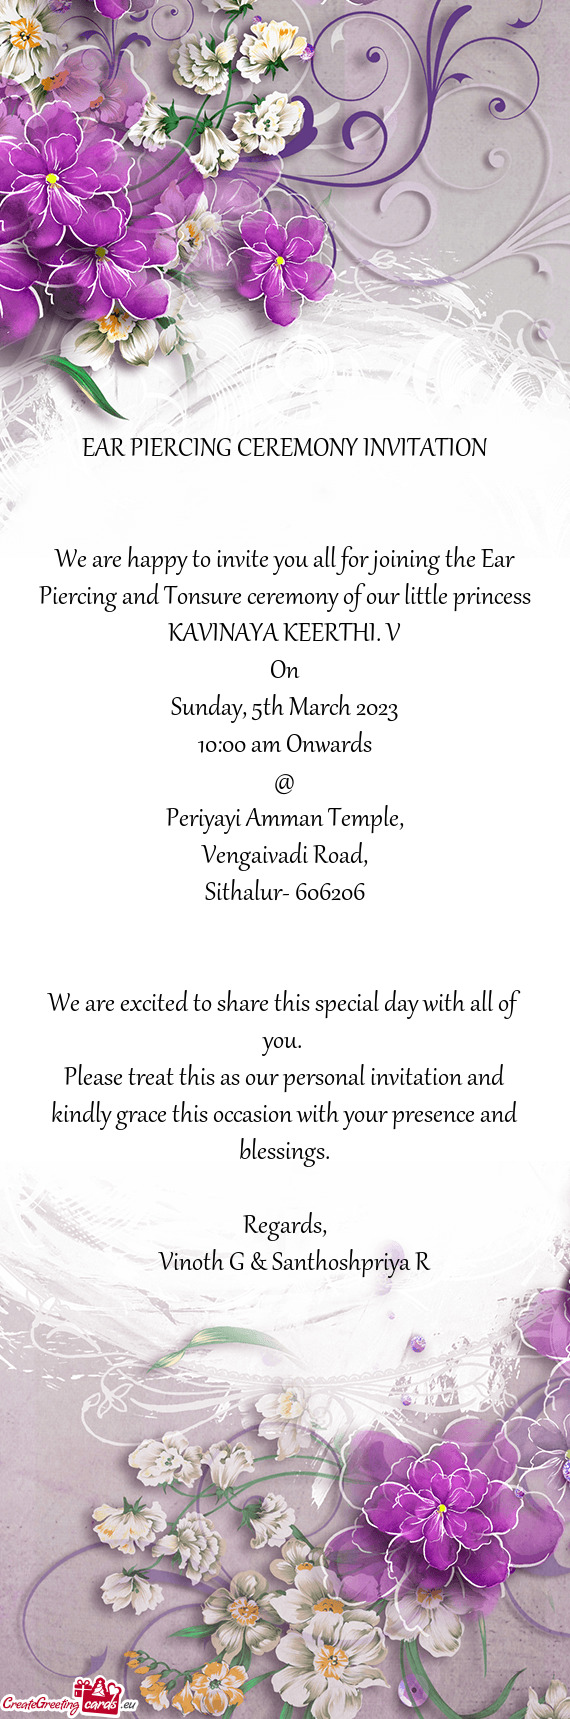 We are happy to invite you all for joining the Ear Piercing and Tonsure ceremony of our little princ